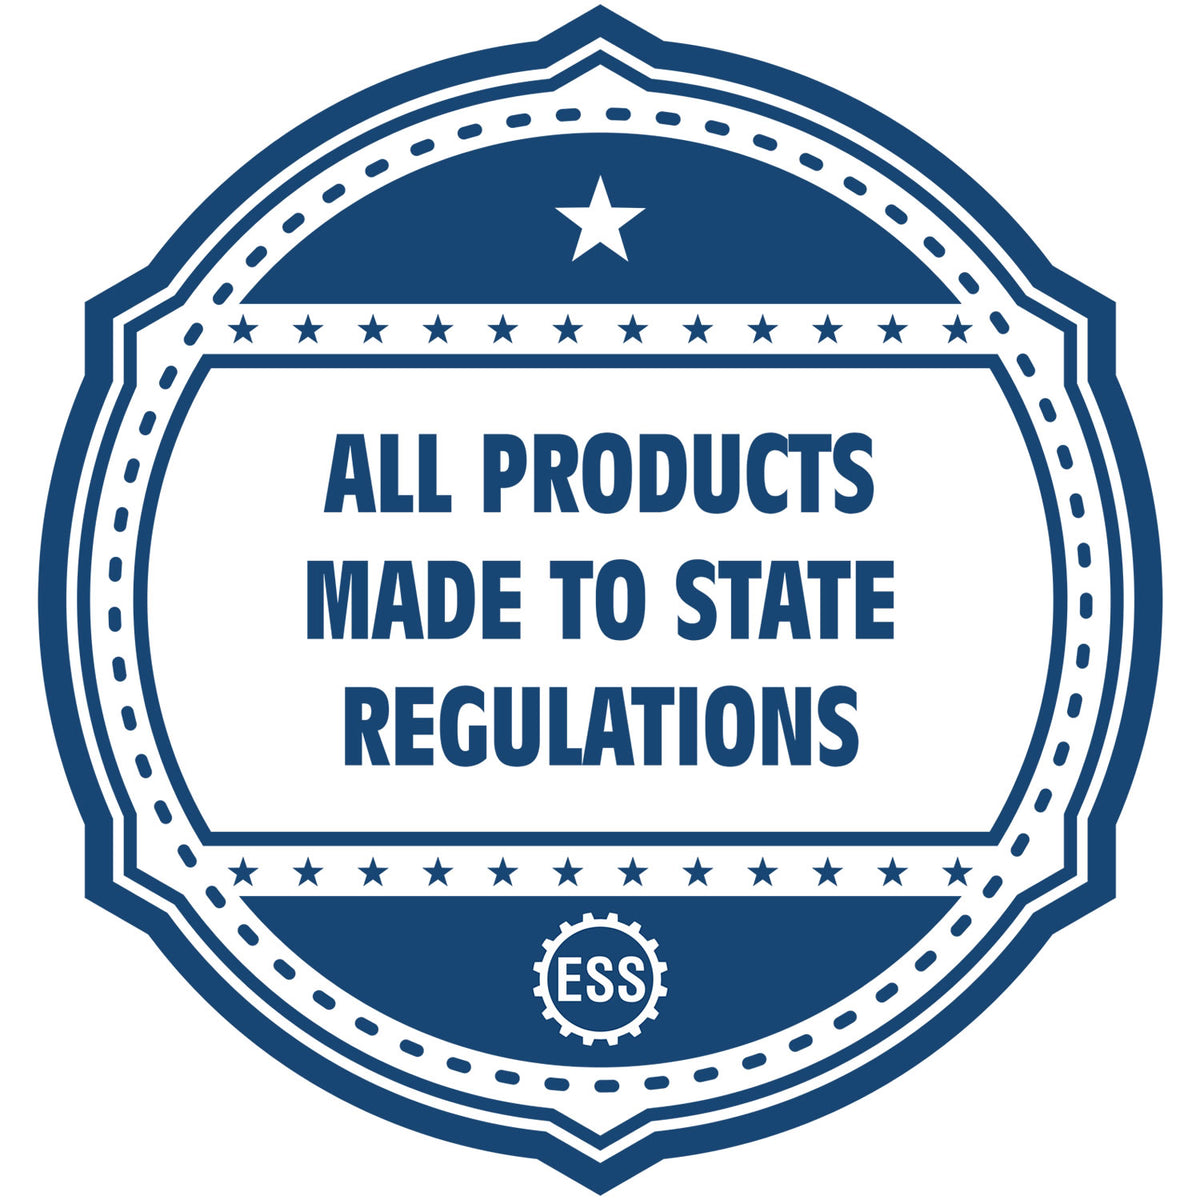 An icon or badge element for the State of South Dakota Extended Long Reach Engineer Seal showing that this product is made in compliance with state regulations.